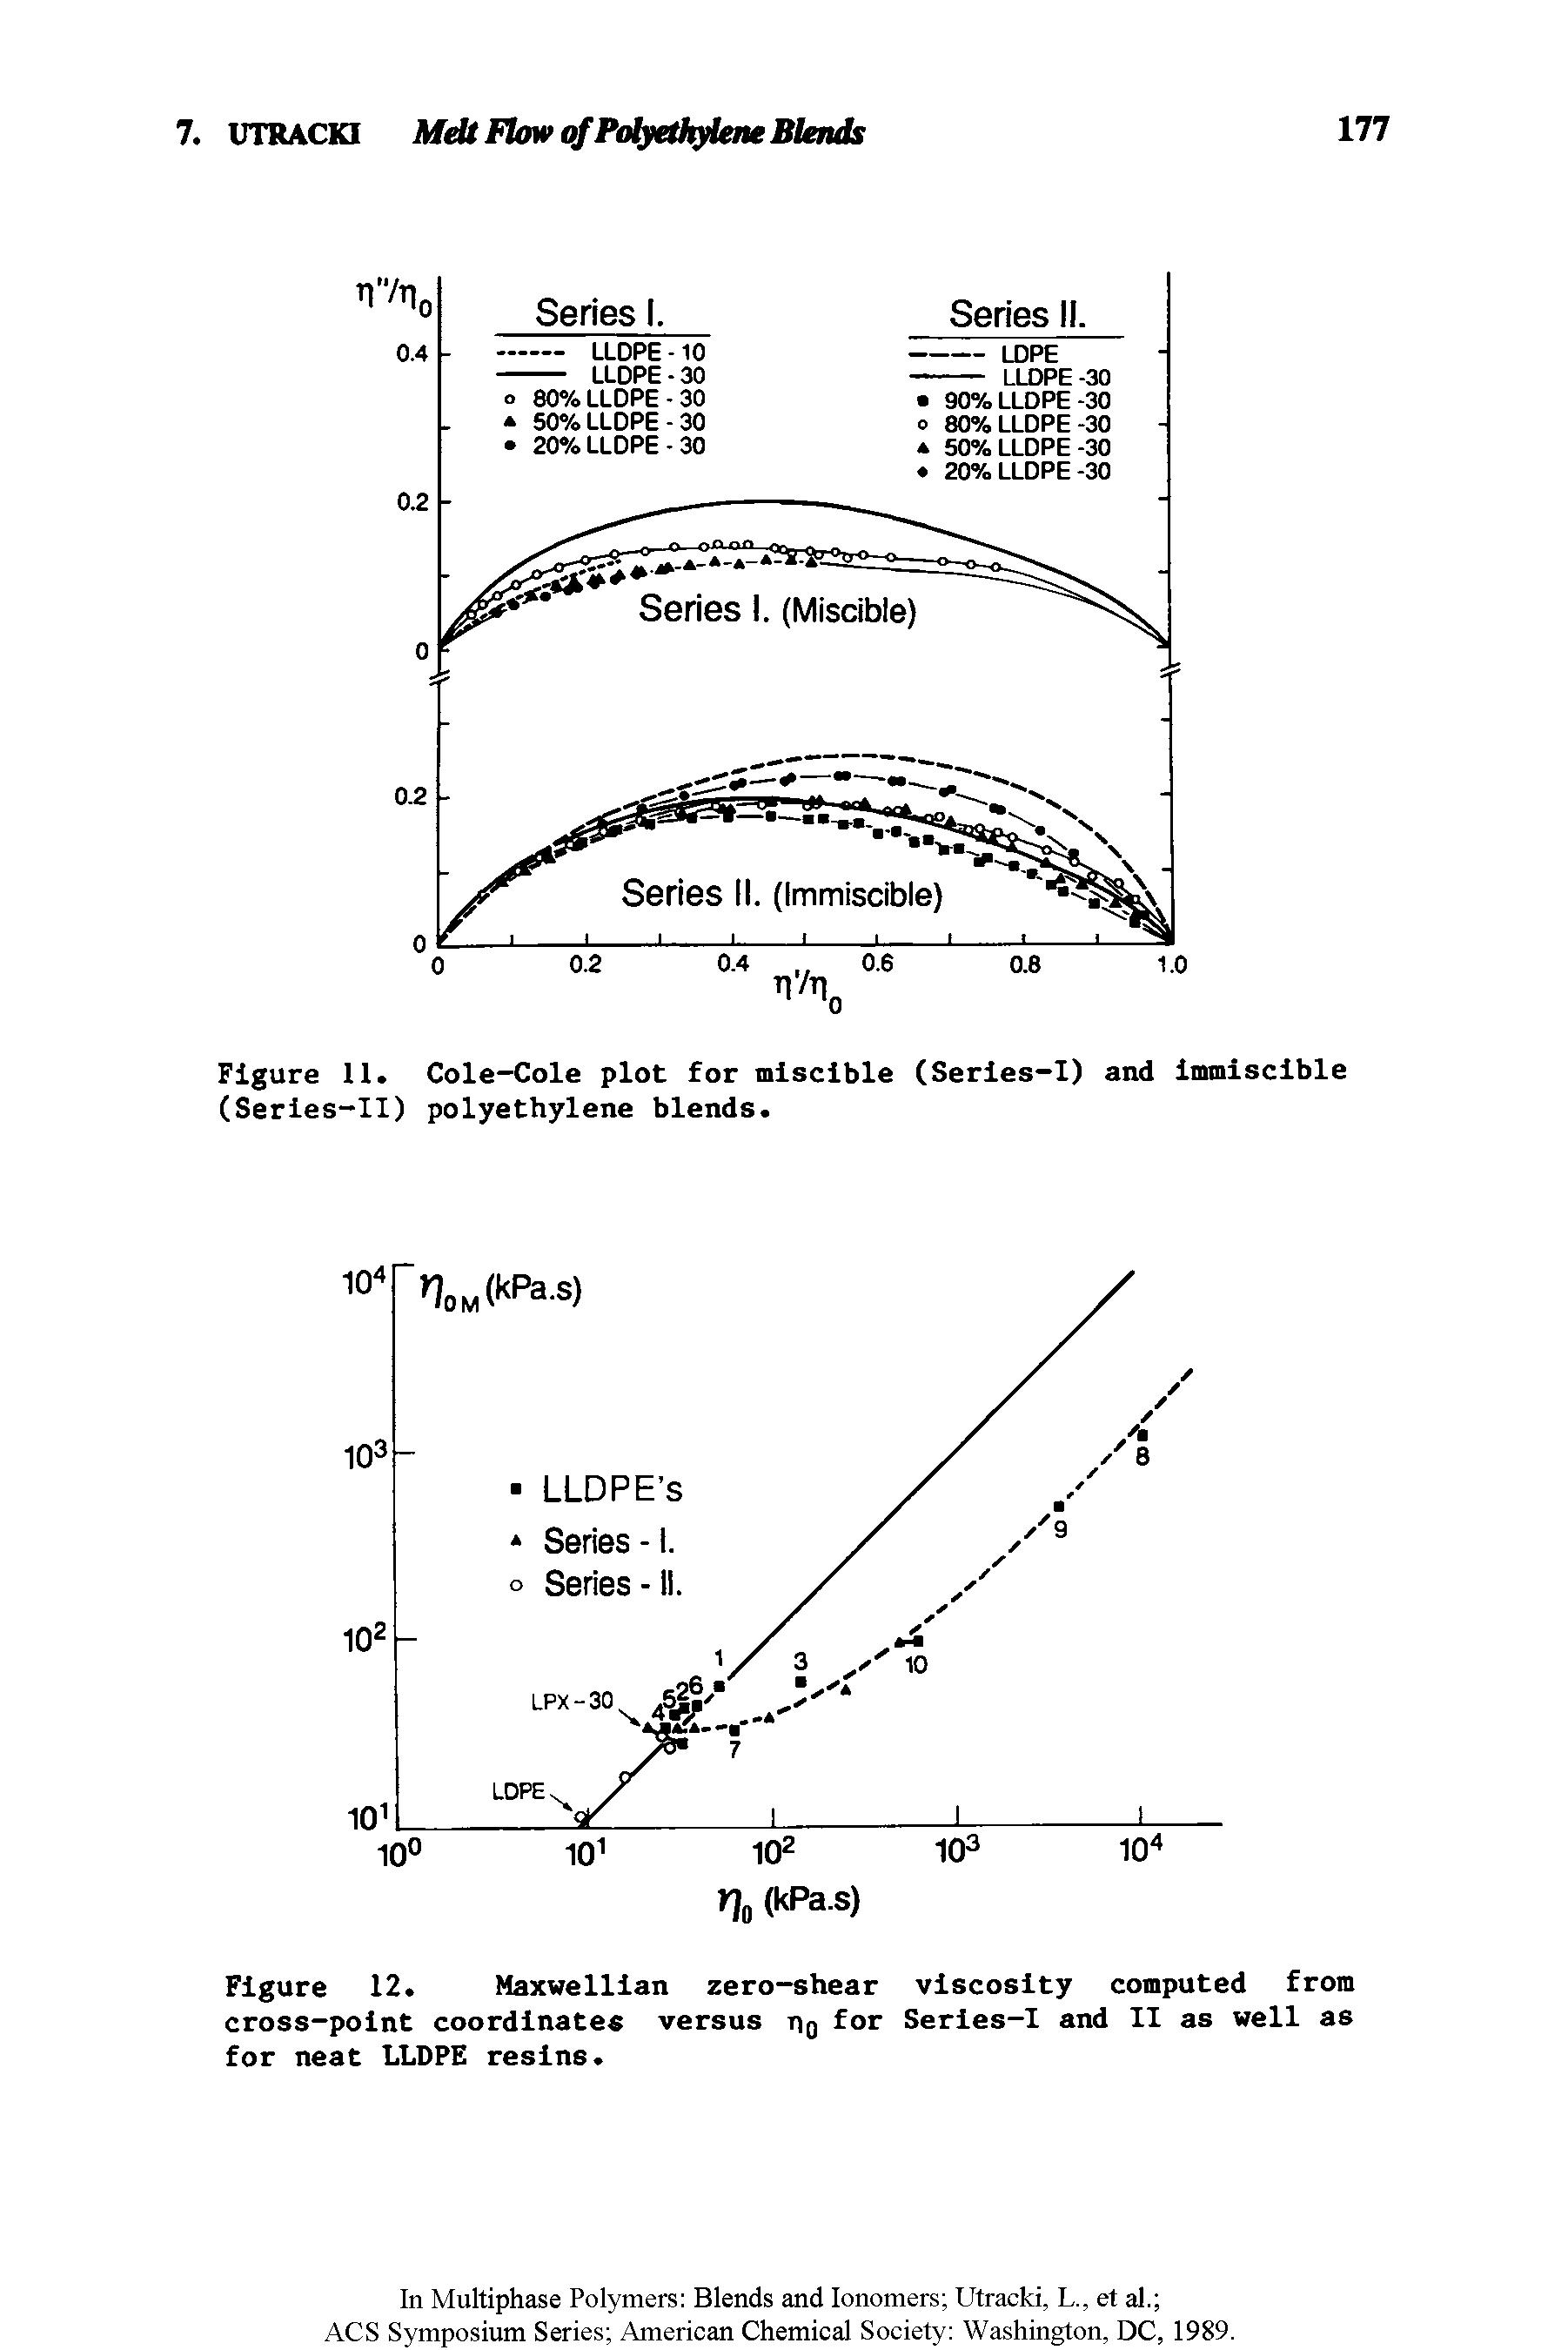 Figure 12. Maxwellian zero-shear viscosity computed from cross-point coordinates versus ng for Series-I and II as well as for neat LLDPE resins.